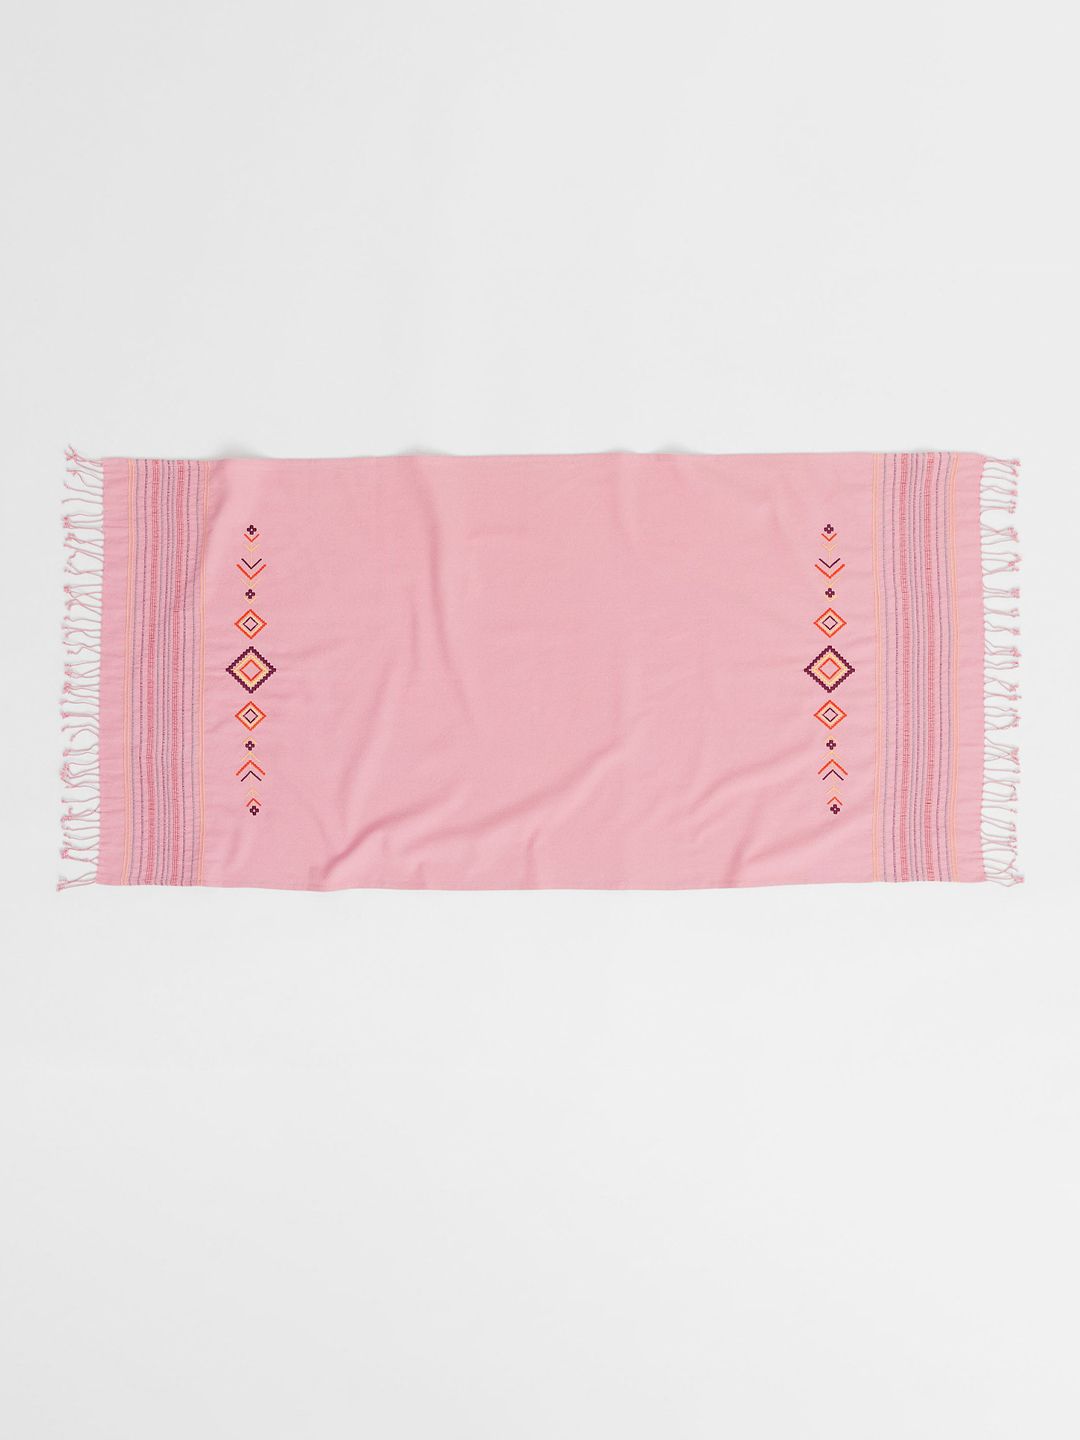 H&M Pink & Red Printed 450 GSM Cotton Beach Towel Price in India